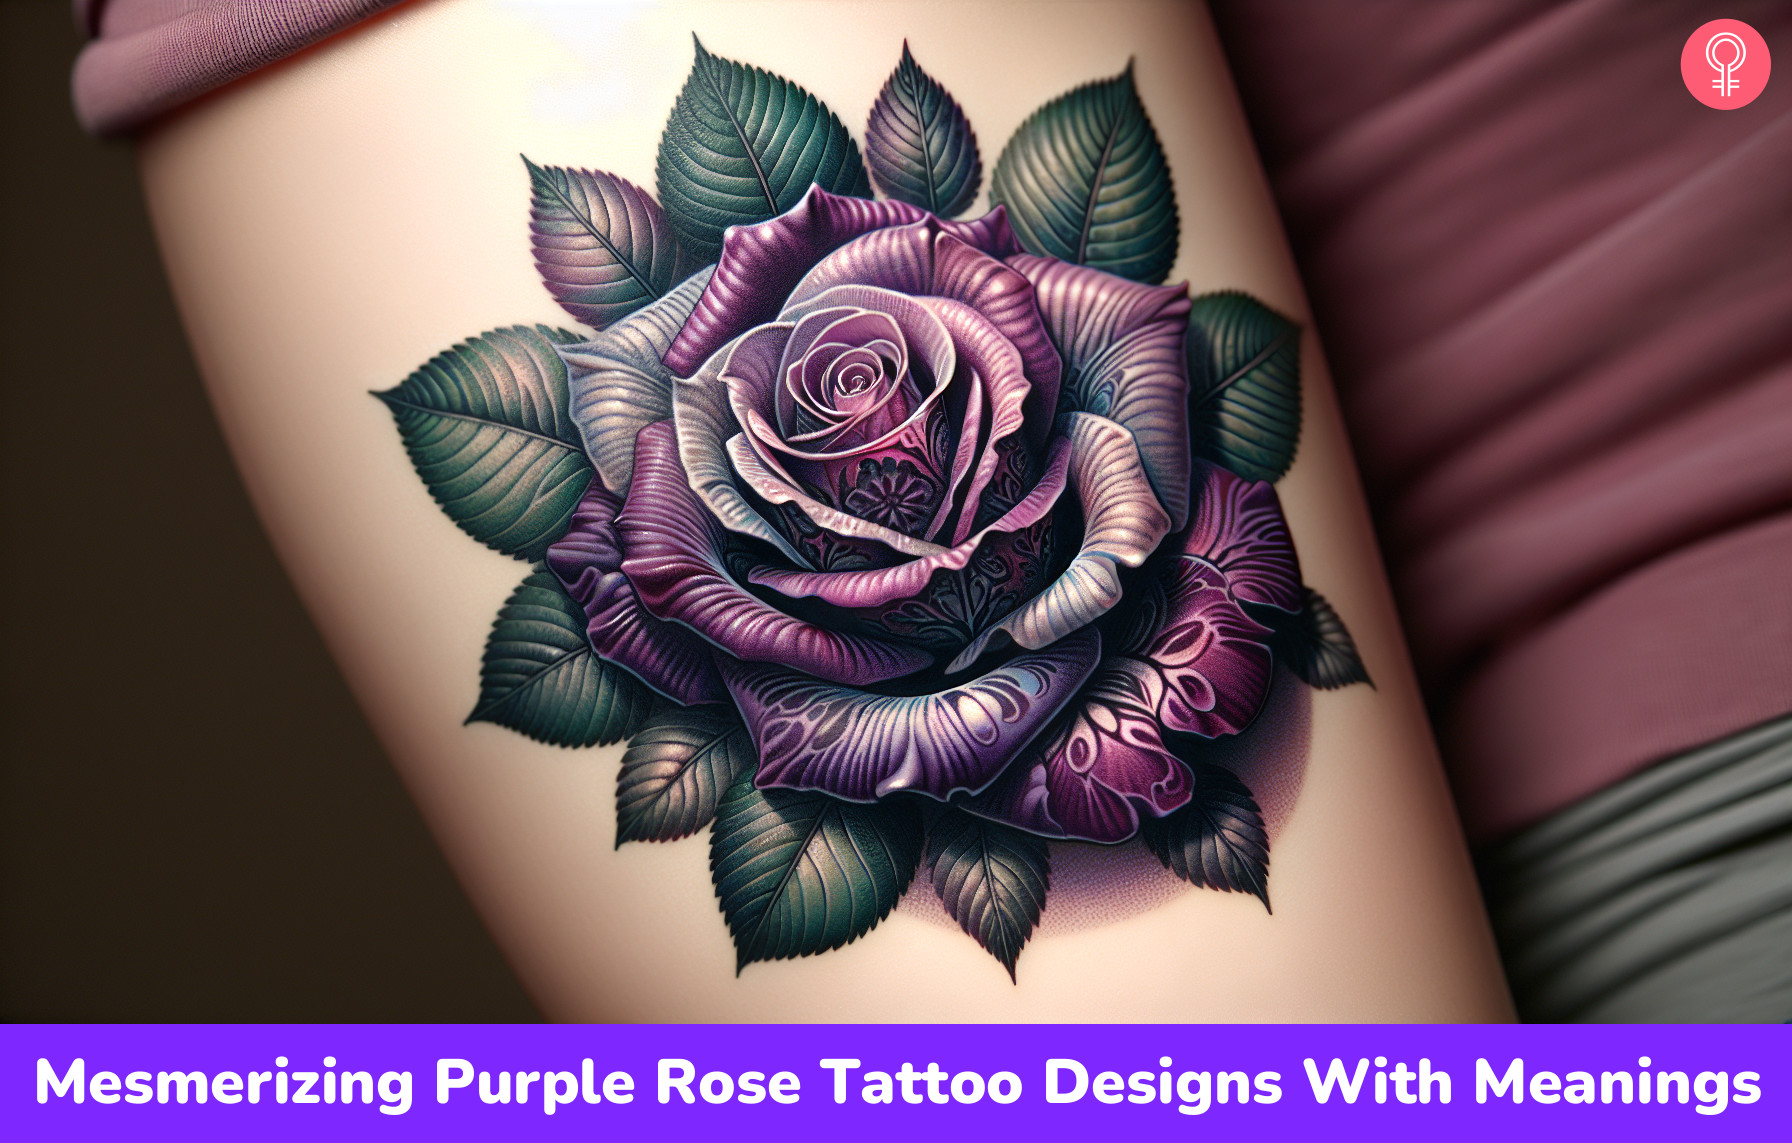 Micro-realistic style purple rose tattoo located on the